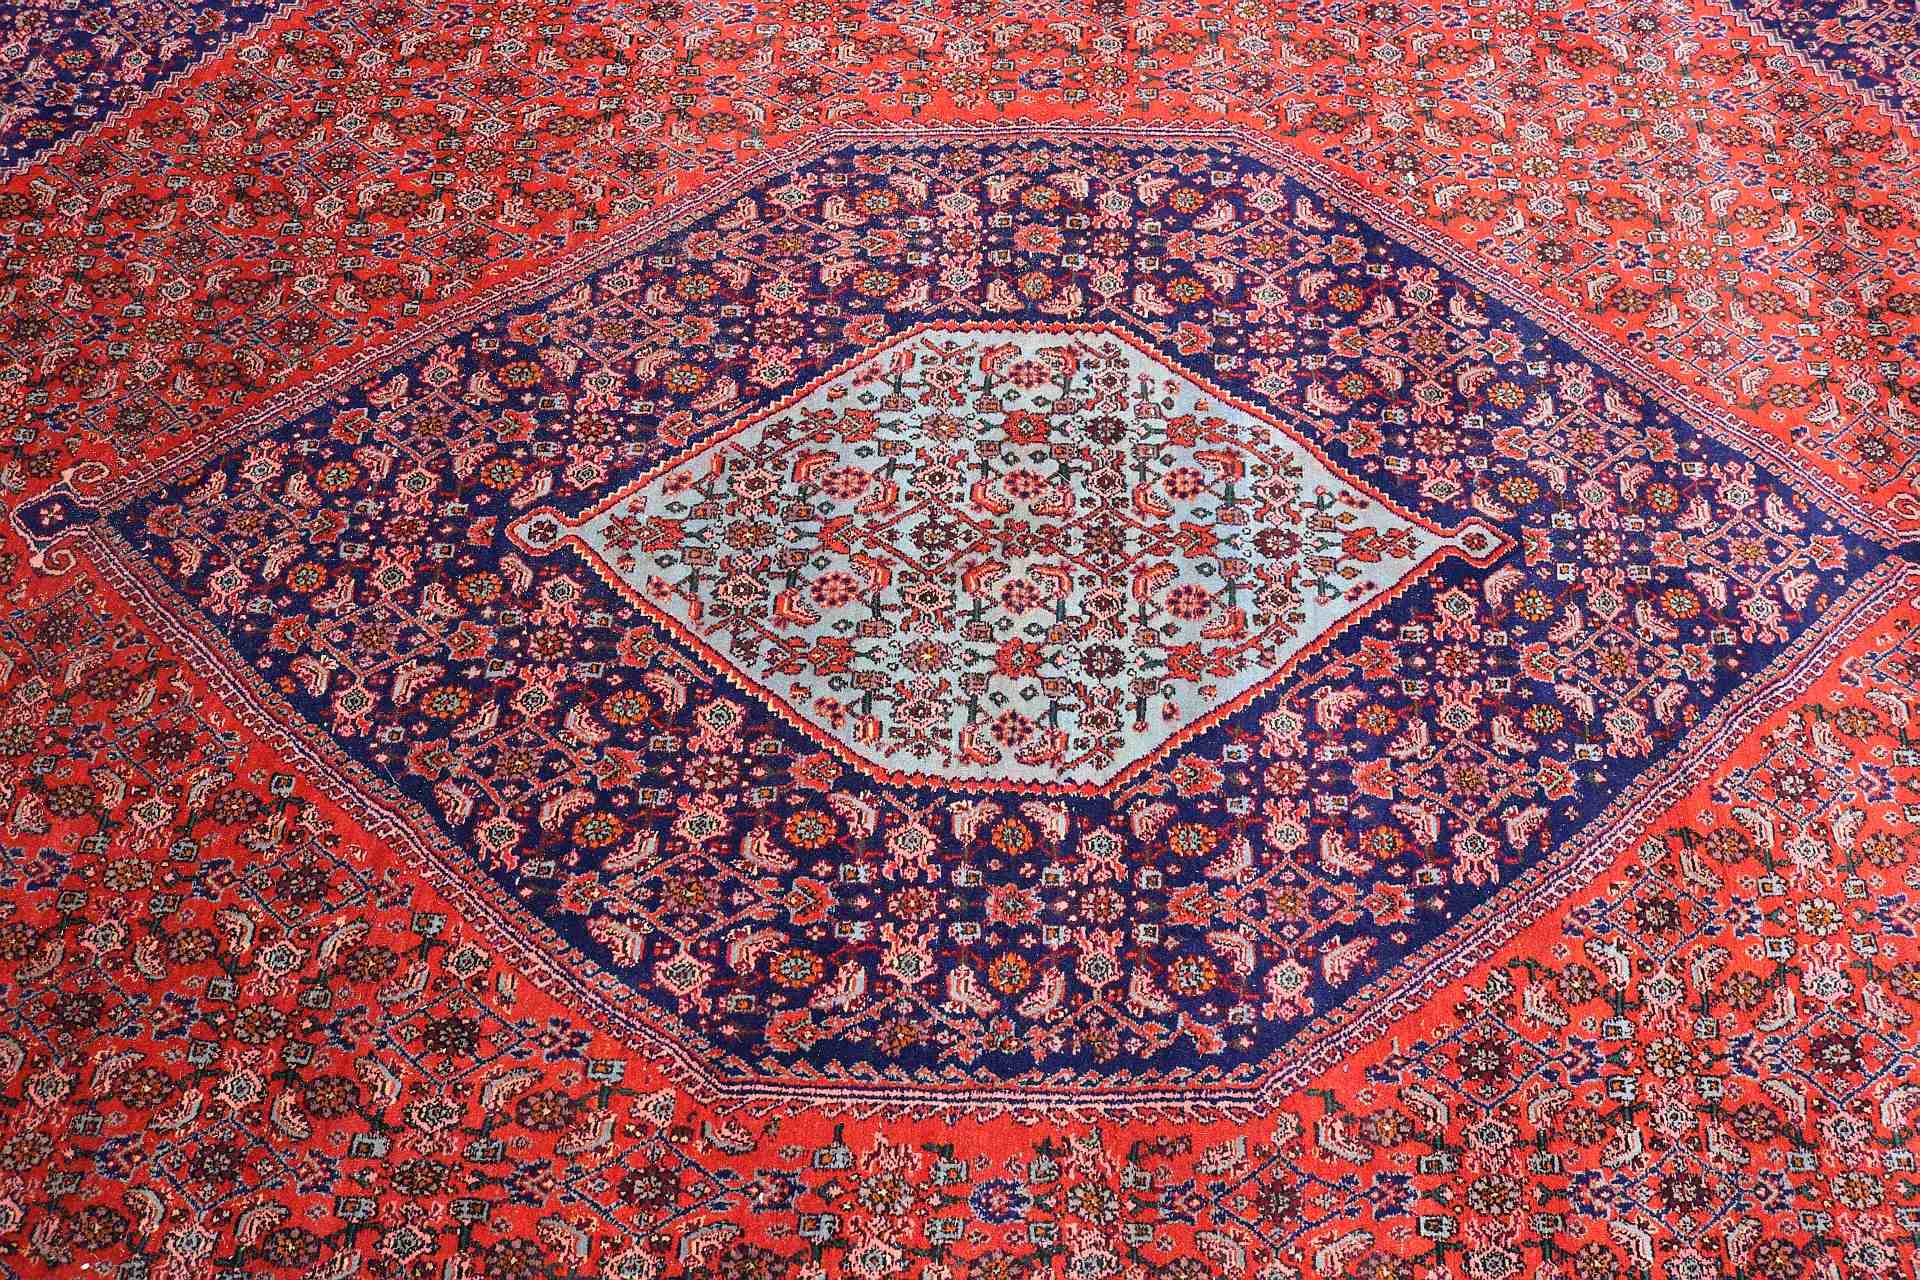 Very large Persian rug, 300 x 400 cm. - Image 2 of 3